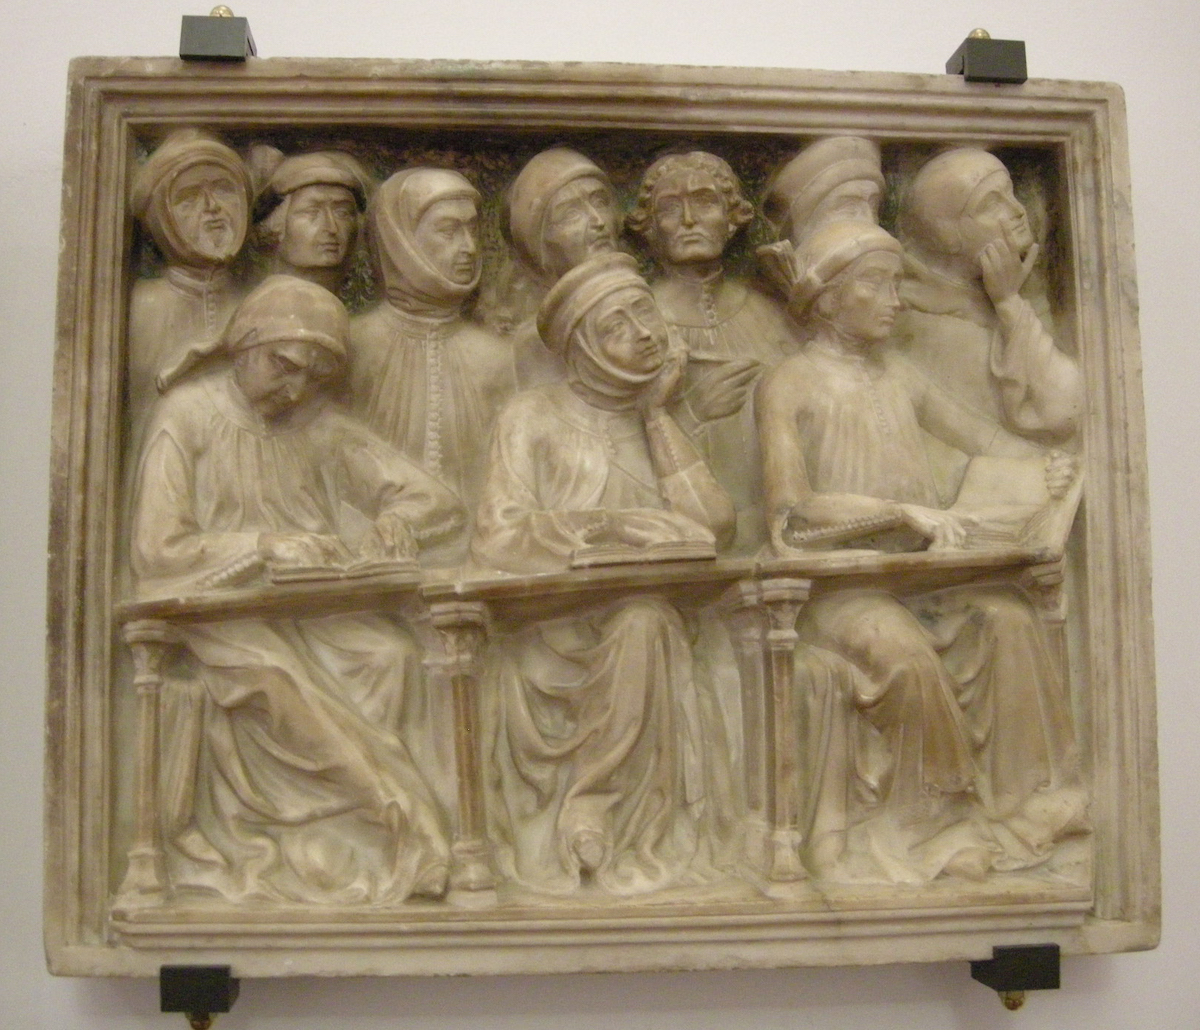 Rectangular stone panel carved with group of ten men, some wearing headgear and three in front of books on desks. Traces of polychromy and ruled frame.